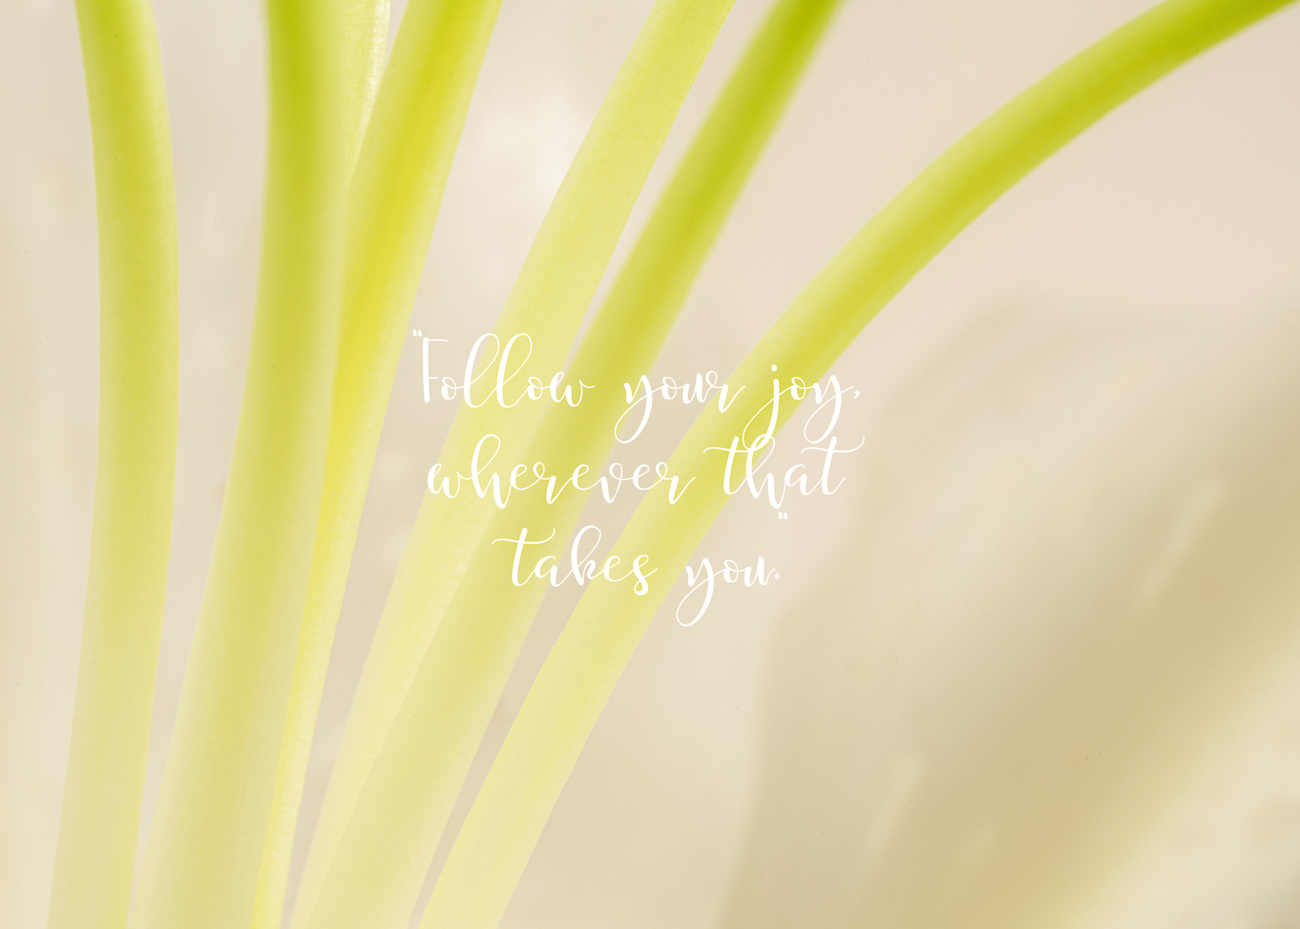 A close-up photo of an Easter lily and a quote about following your joy.